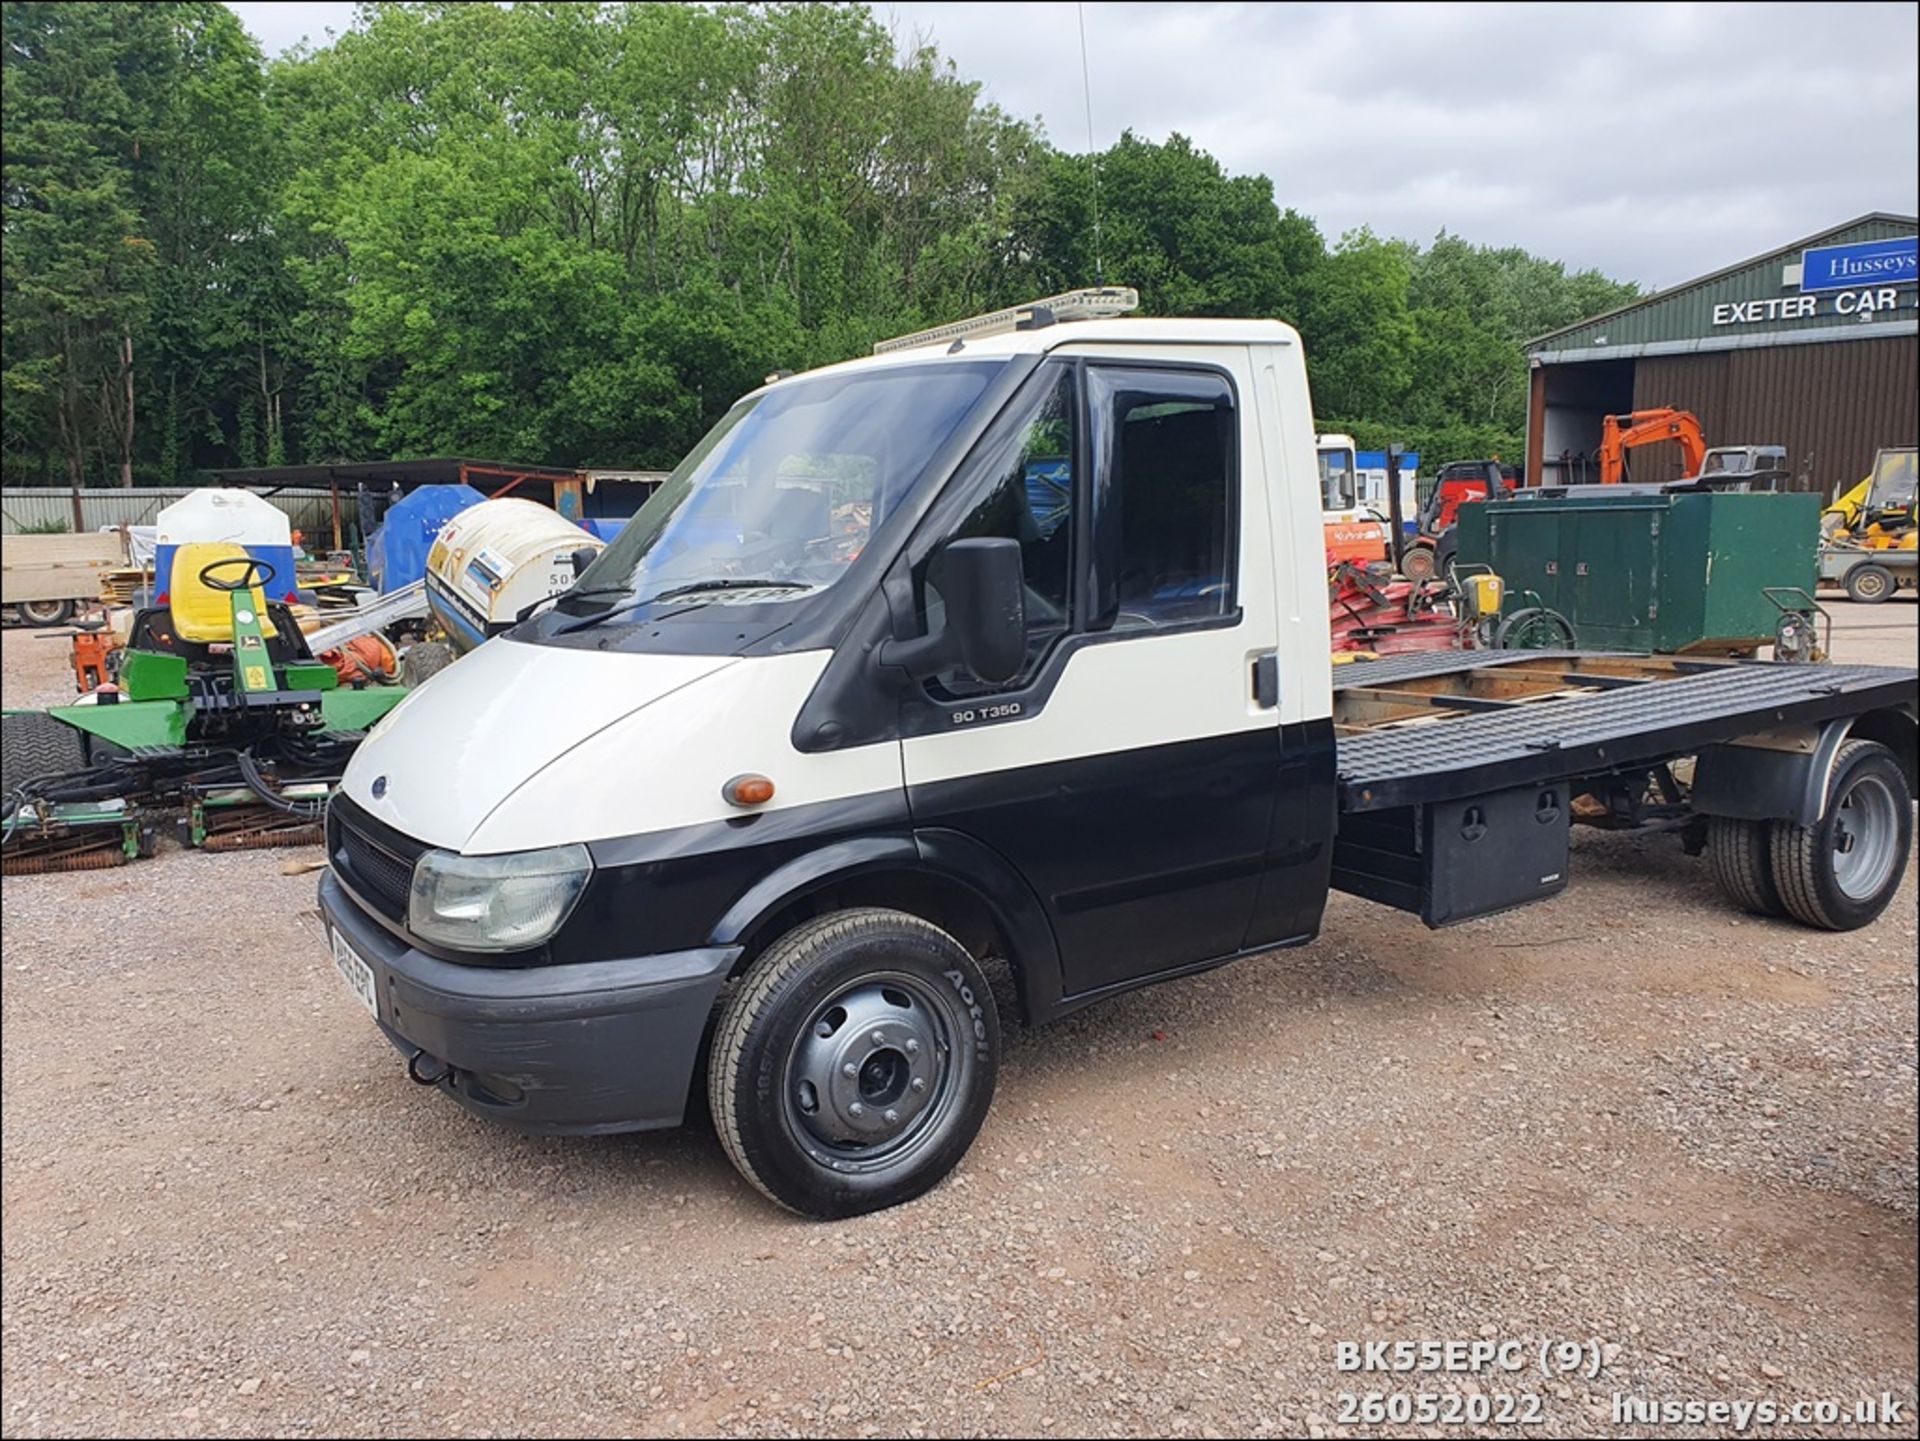 05/55 FORD TRANSIT RECOVERY 350 LWB - 2402cc 2dr (White) - Image 13 of 19